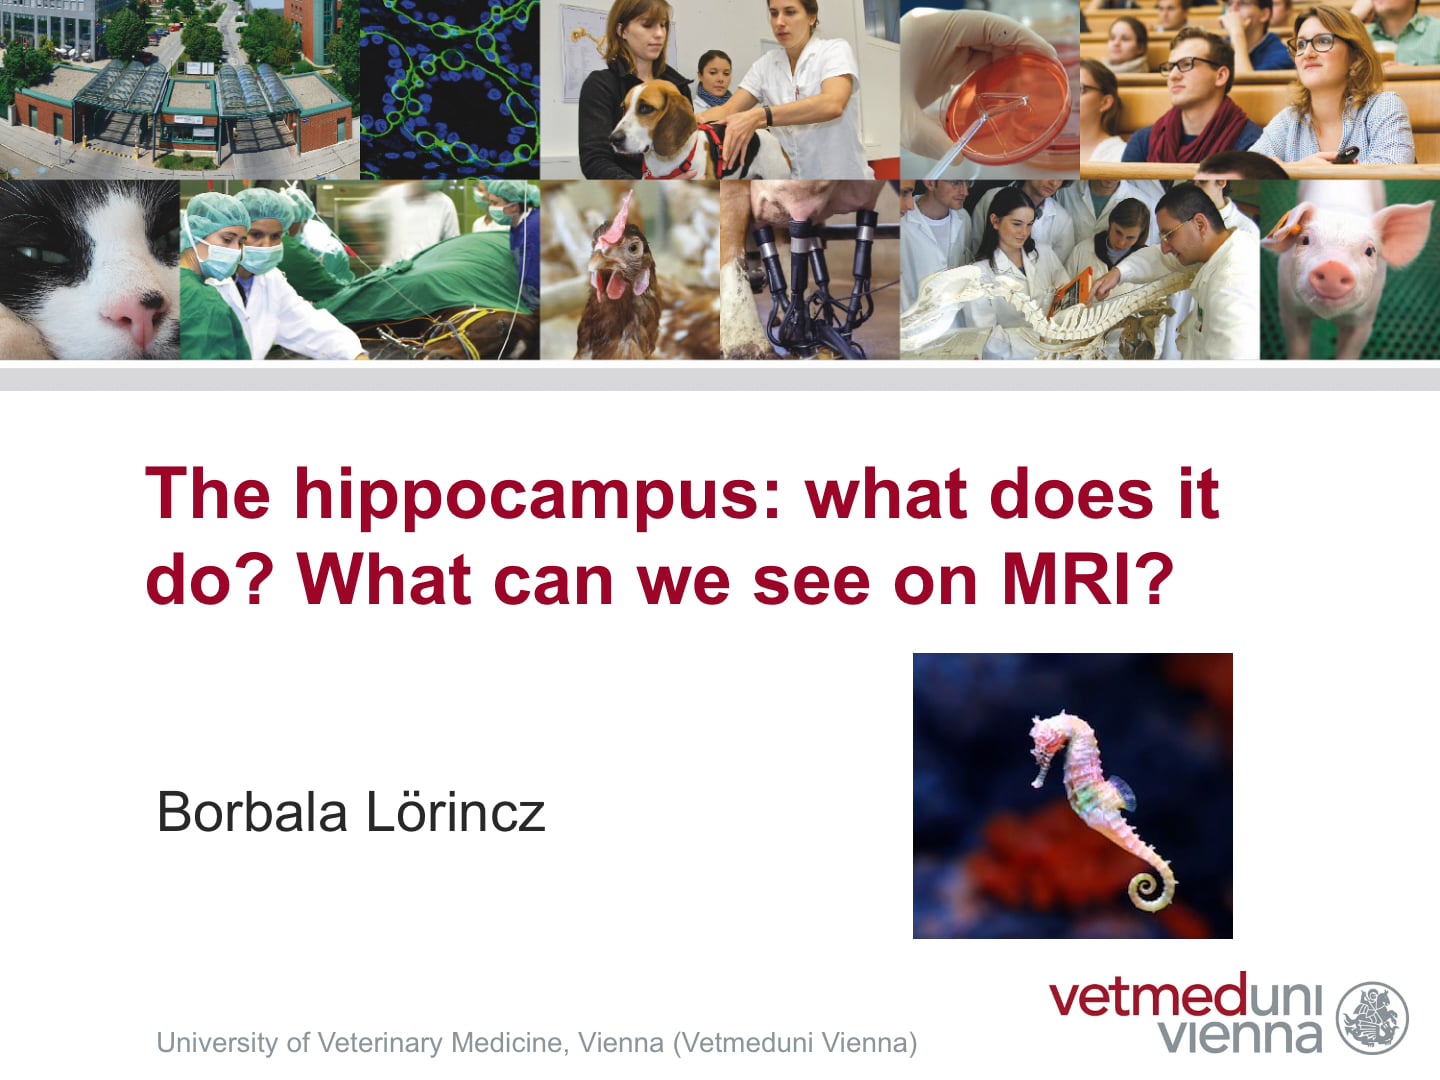 The hippocampus: what does it do? What can we see in MRI?